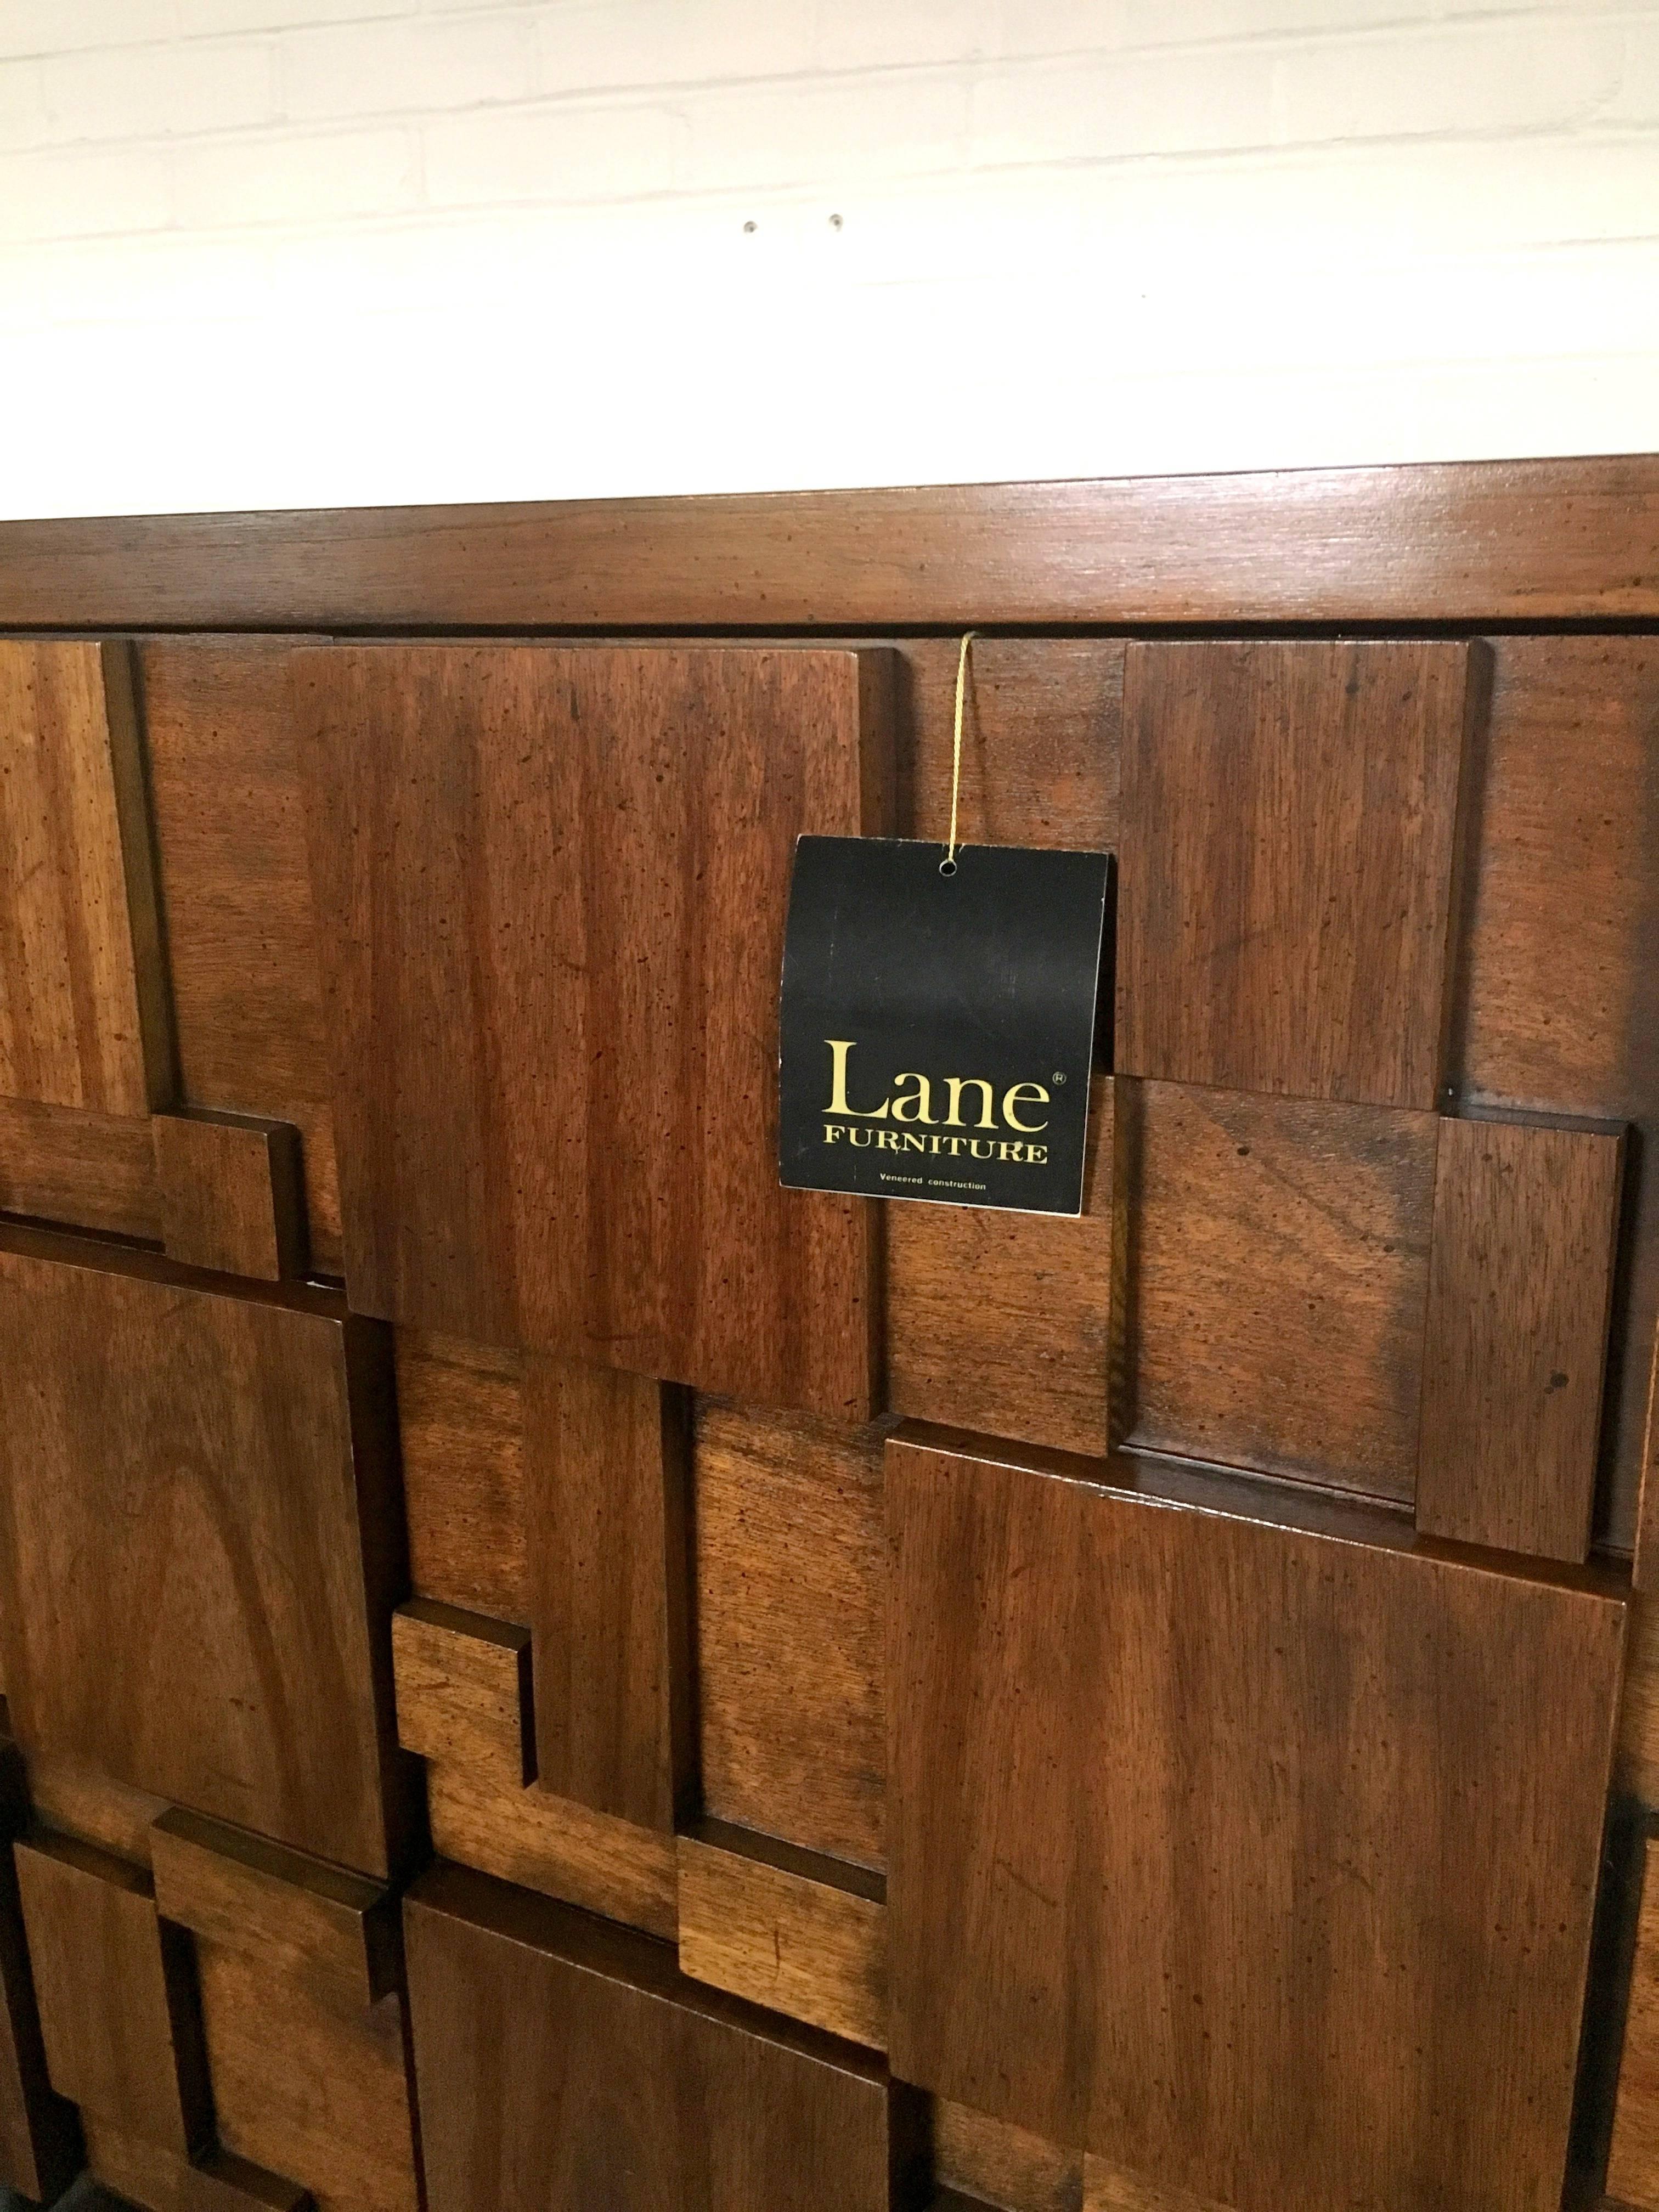 Restored Brutalist dresser in the manner of Paul Evans.
This piece has been restored to its original condition and gleams beautifully.
The surface, sides and front are now flawless minus one older 1